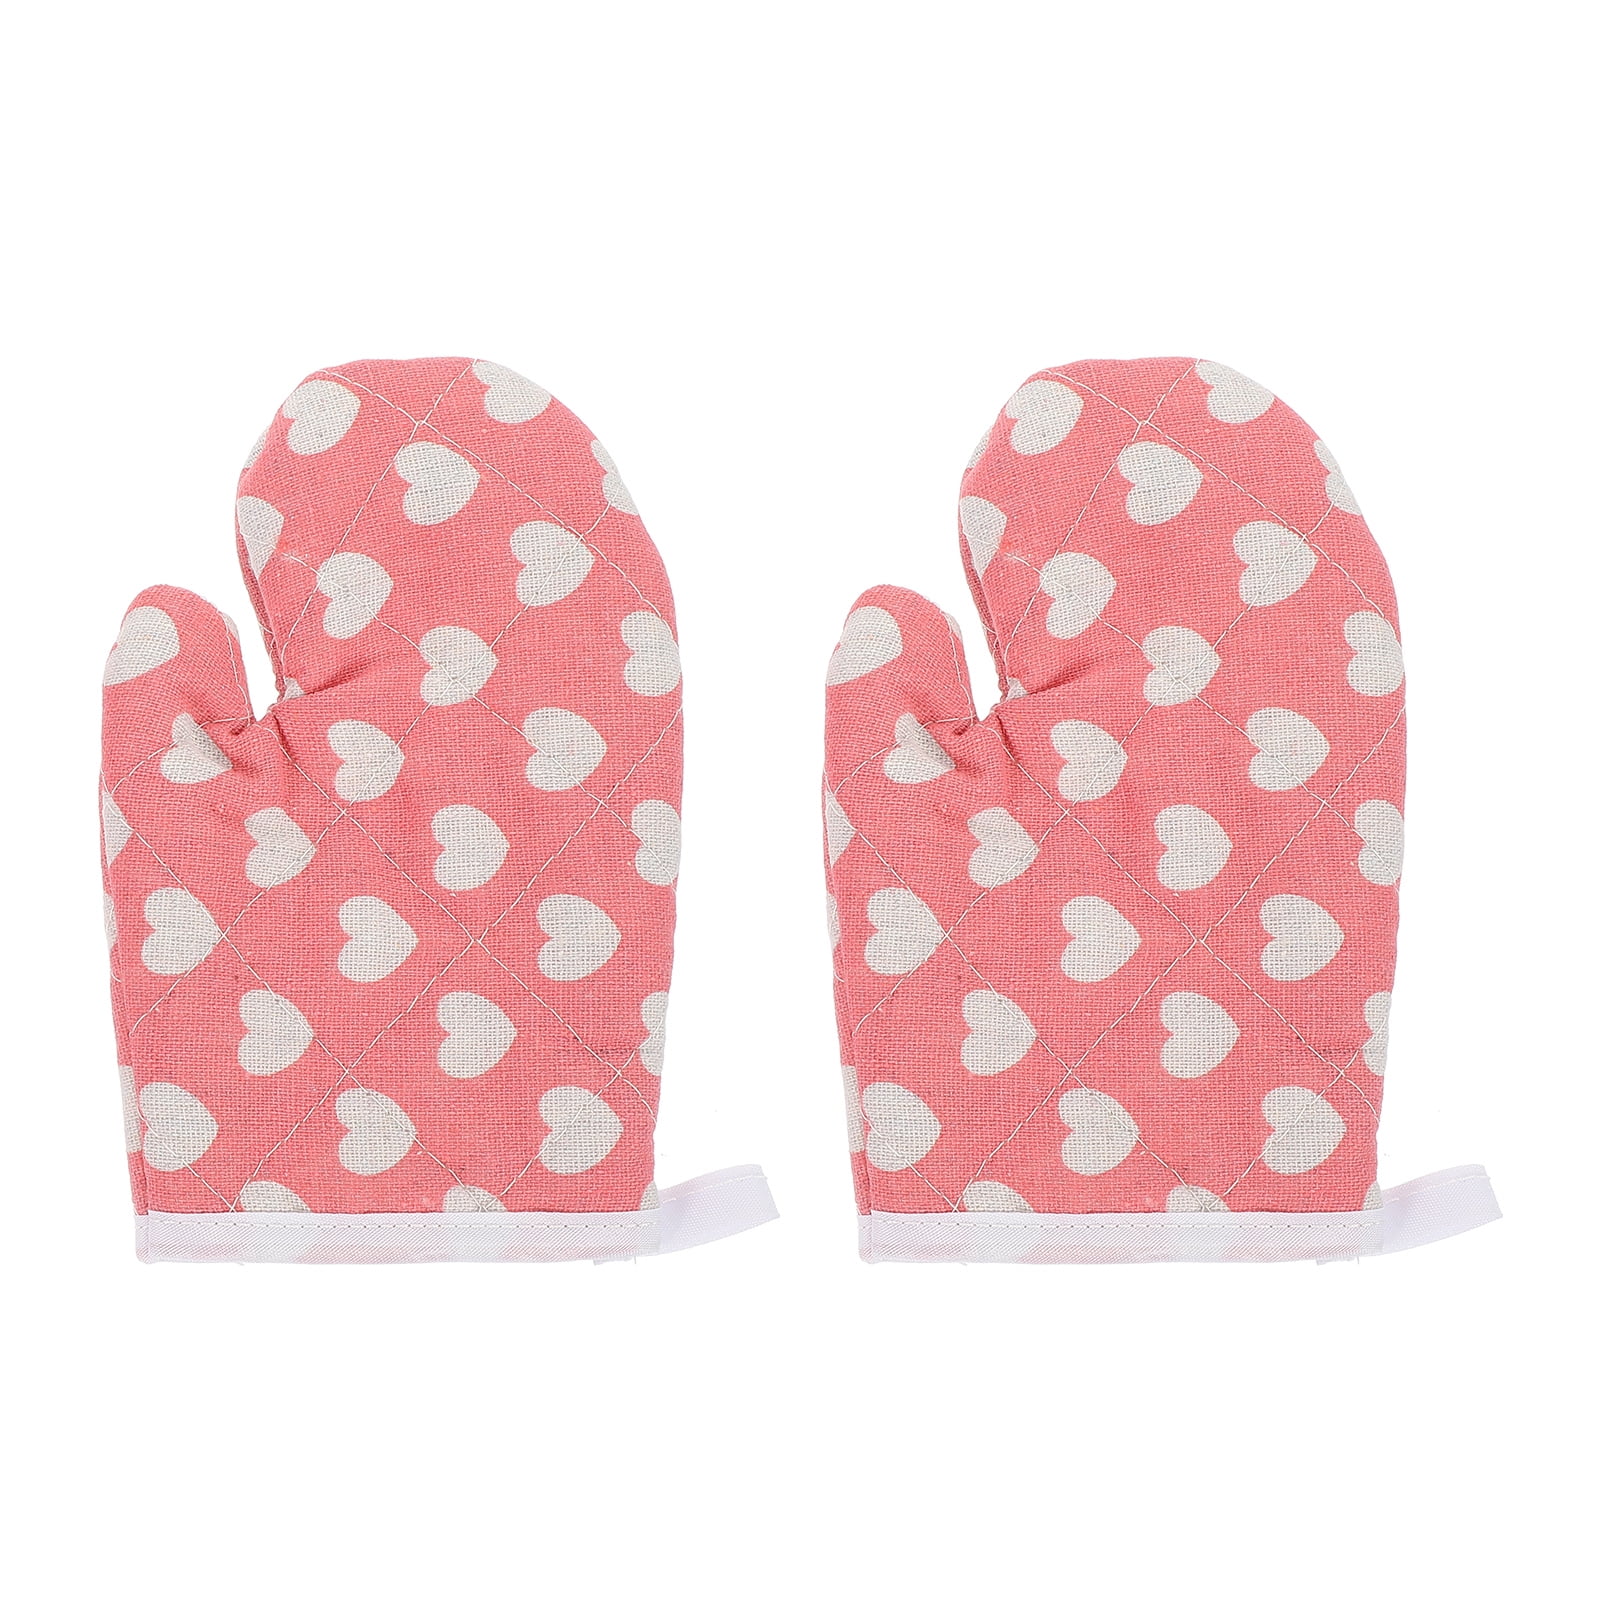 Cabilock Kids Oven Mitts for Children Play Kitchen Heat Resistant Kitchen  Mitts for Kids Toddler (2pcs)